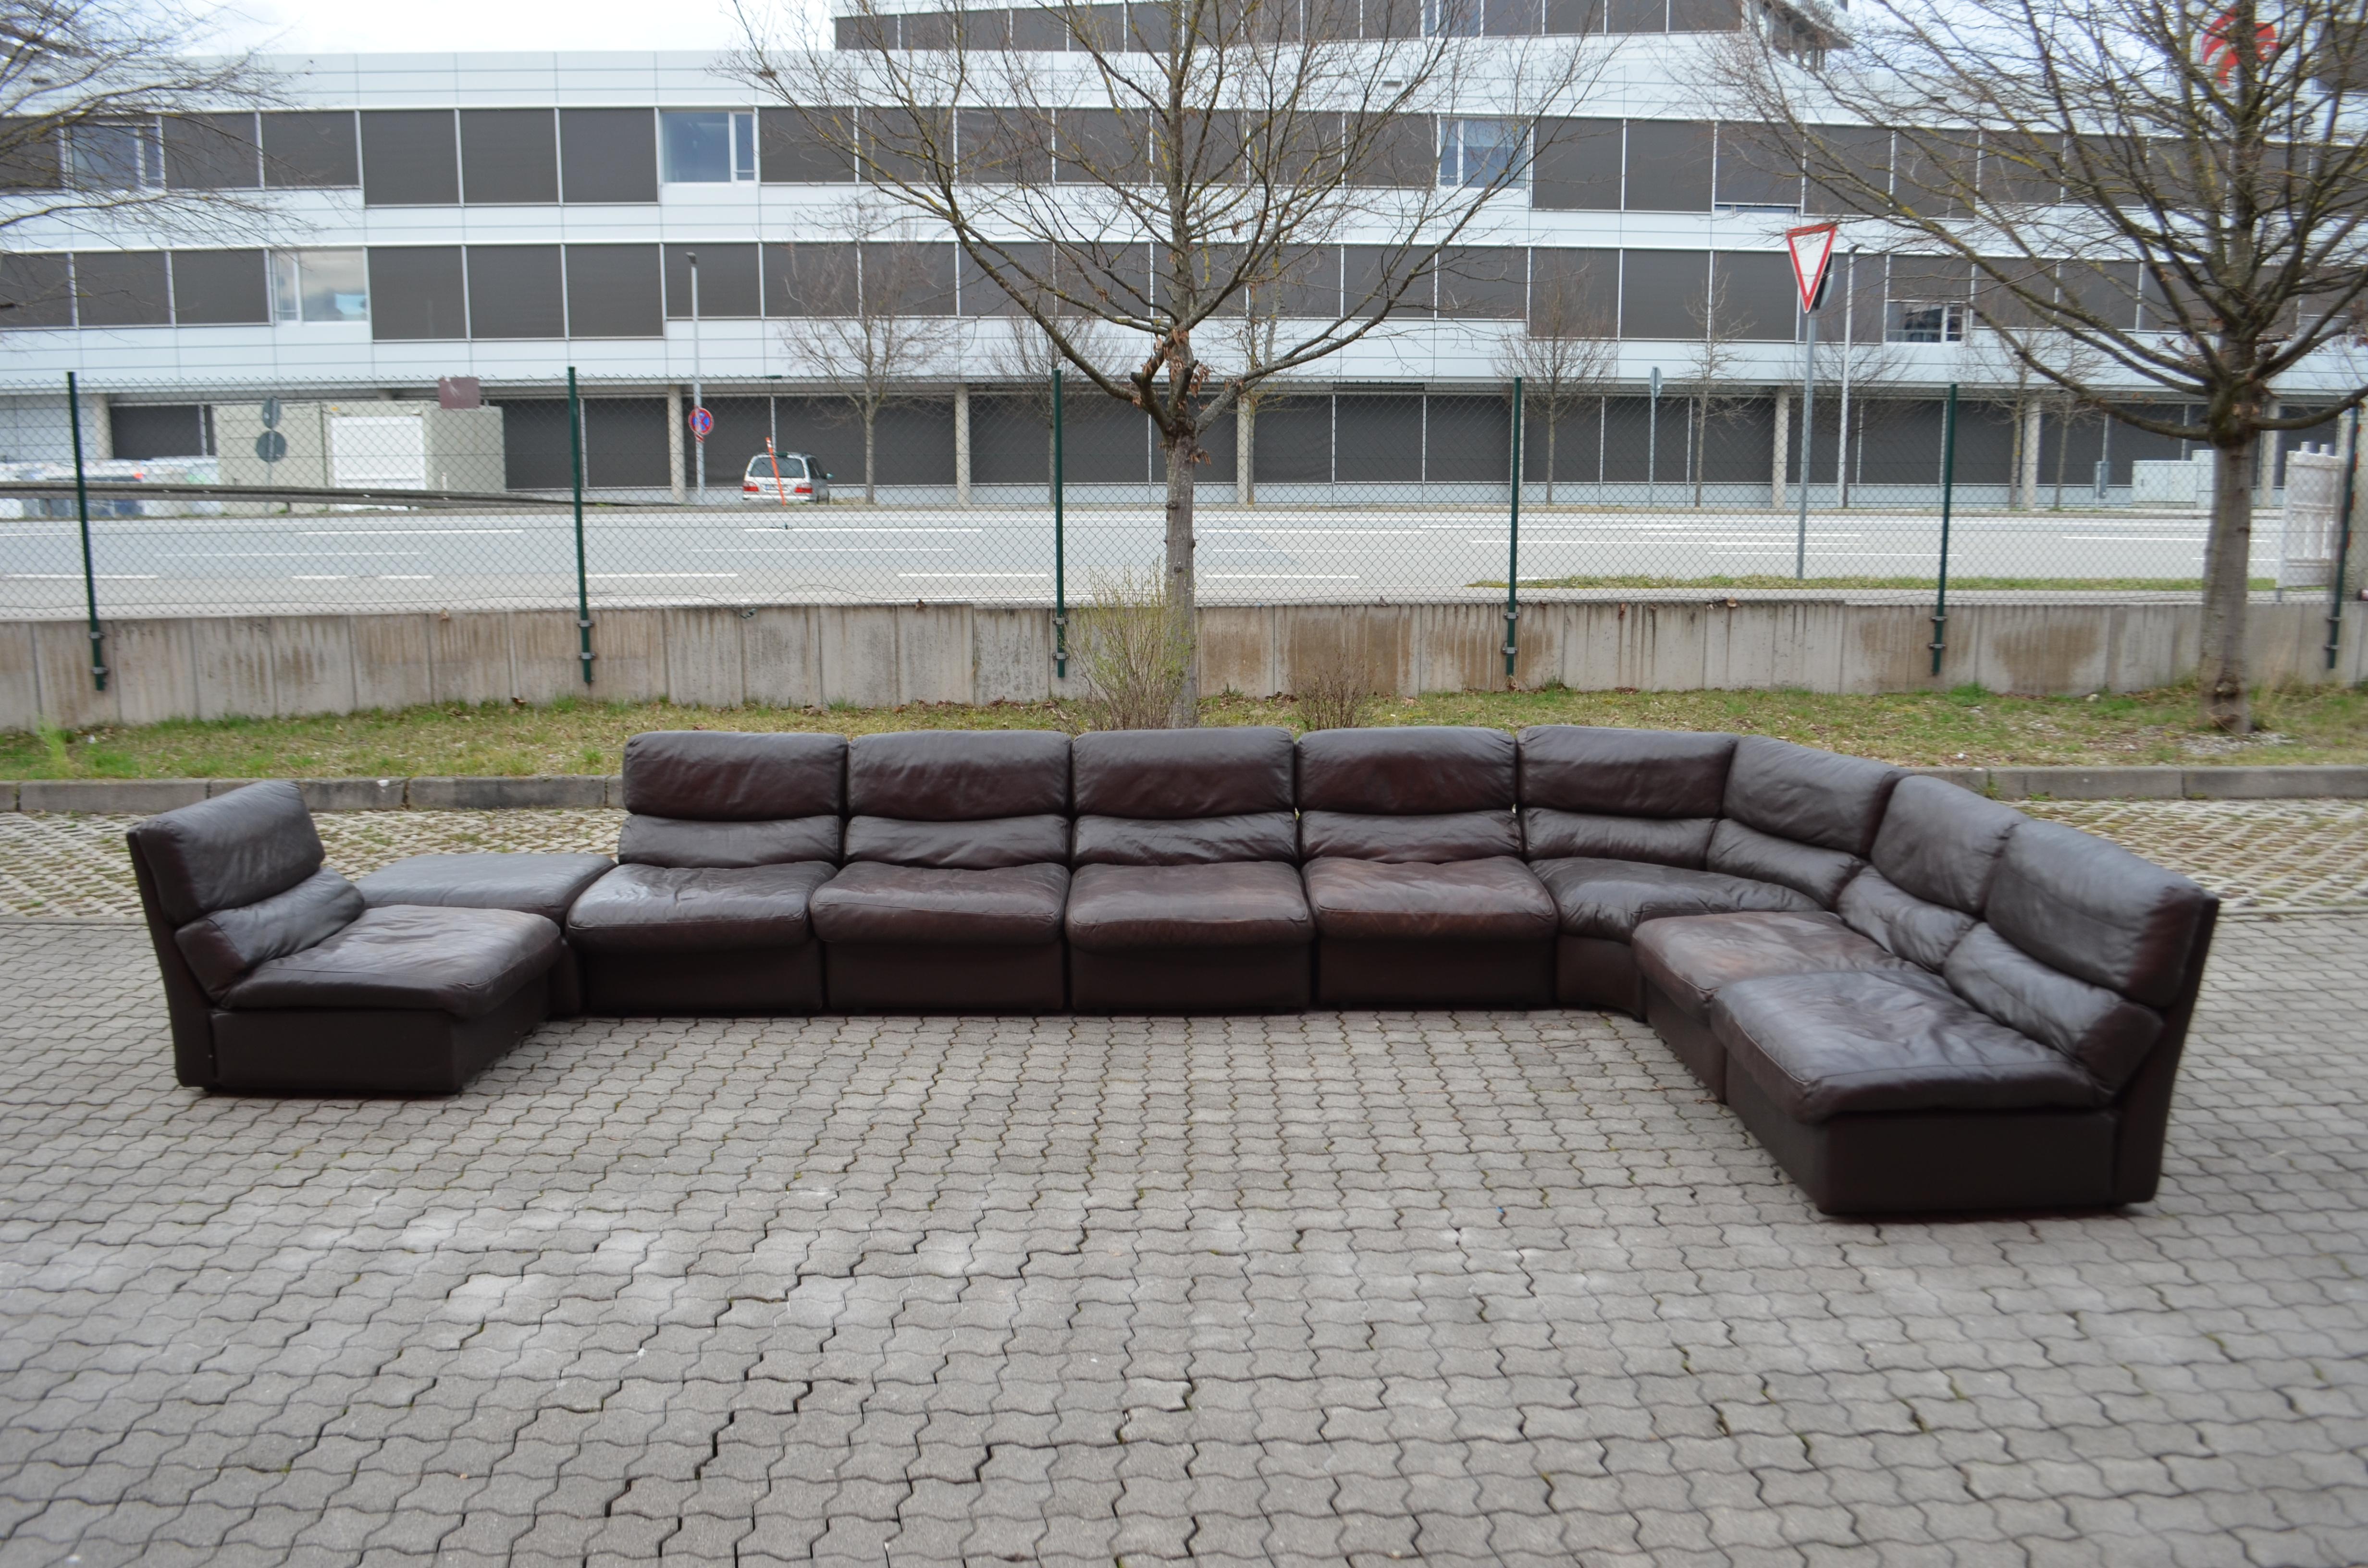 This stunning Modular sectional leather sofa was produced by Rolf Benz manufactured in Germany.
It is a pure 70ties design with timeless modern shape.
The leather is a aniline brown color with a soft leather touch.
The pillows are filled with down